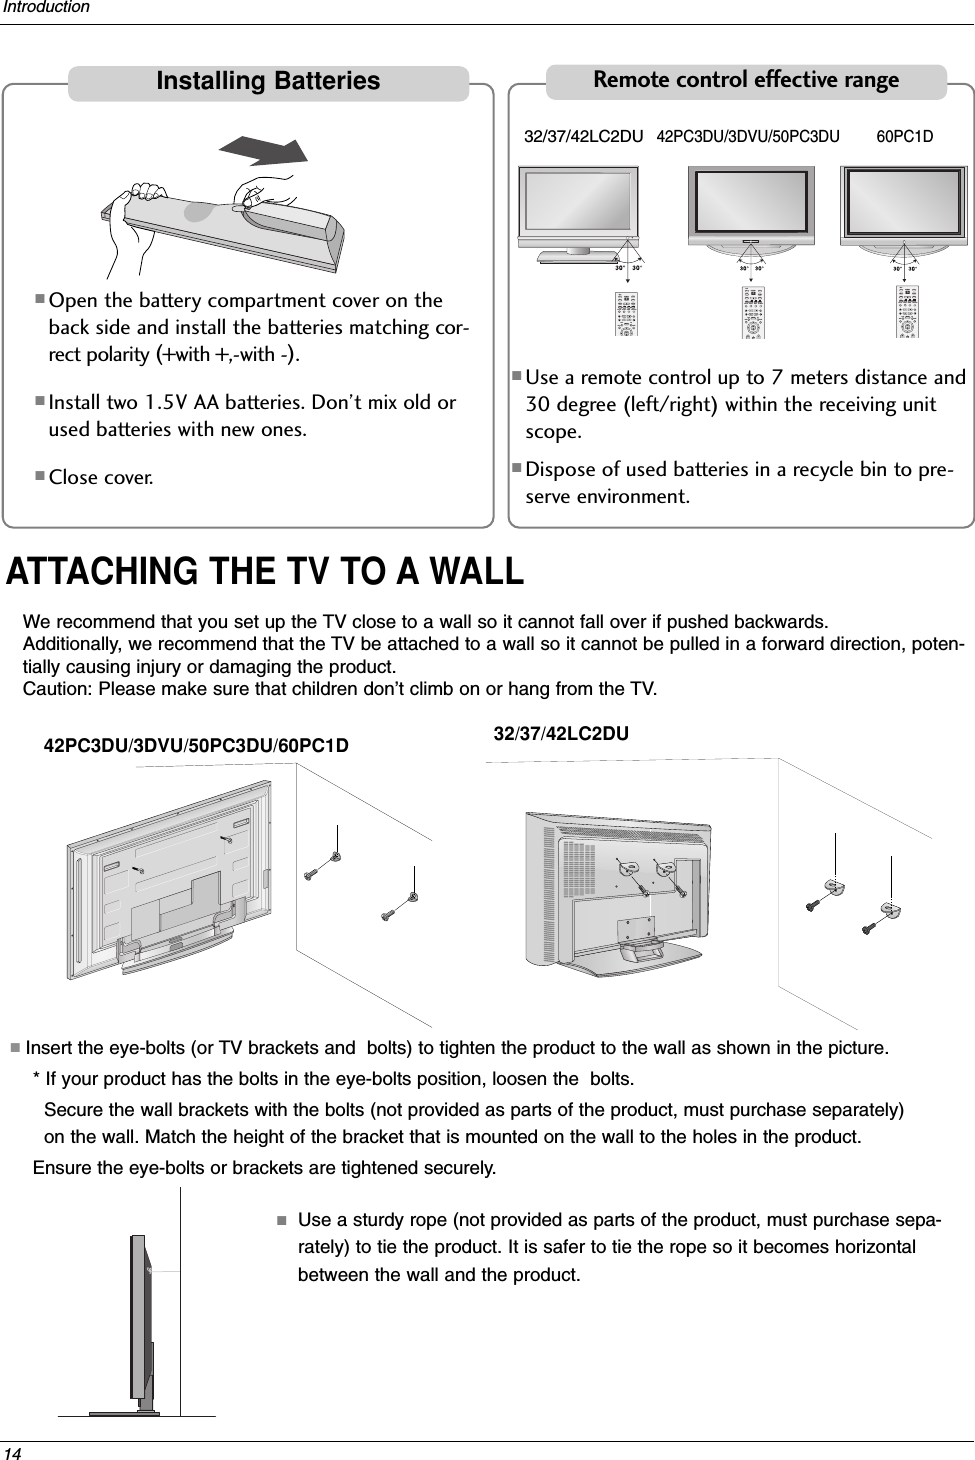 14IntroductionATTACHING THE TV TO A WALLWe recommend that you set up the TV close to a wall so it cannot fall over if pushed backwards. Additionally, we recommend that the TV be attached to a wall so it cannot be pulled in a forward direction, poten-tially causing injury or damaging the product. Caution: Please make sure that children don’t climb on or hang from the TV. ■Insert the eye-bolts (or TV brackets and  bolts) to tighten the product to the wall as shown in the picture. * If your product has the bolts in the eye-bolts position, loosen the  bolts.Secure the wall brackets with the bolts (not provided as parts of the product, must purchase separately)on the wall. Match the height of the bracket that is mounted on the wall to the holes in the product.Ensure the eye-bolts or brackets are tightened securely.■Use a sturdy rope (not provided as parts of the product, must purchase sepa-rately) to tie the product. It is safer to tie the rope so it becomes horizontalbetween the wall and the product.42PC3DU/3DVU/50PC3DU/60PC1D 32/37/42LC2DU■Open the battery compartment cover on theback side and install the batteries matching cor-rect polarity (+with +,-with -).■Install two 1.5V AA batteries. Don’t mix old orused batteries with new ones.■Close cover.■Use a remote control up to 7 meters distance and30 degree (left/right) within the receiving unitscope.■Dispose of used batteries in a recycle bin to pre-serve environment.OK TVTVINPUTINPUTDVDARCEXITPIP PR + PIP INPUTSWAPPIP PR -SLEEPLISTI/IIMENUTEXT PIPSIZEPOSITIONVCRPOWEROK TVTVINPUTINPUTDVDARCEXITPIP PR + PIP INPUTSWAPPIP PR -Q.VIEWSLEEPLISTI/IIMENUTEXT PIPSIZEPOSITIONVCRPOWEROK TVTVINPUTINPUTDVDARCEXITPIP PR + PIP INPUTSWAPPIP PR -Q.VIEWSLEEPLISTI/IIMENUTEXT PIPSIZEPOSITIONVCRPOWER32/37/42LC2DU42PC3DU/3DVU/50PC3DU 60PC1DInstalling BatteriesRemote control effective range